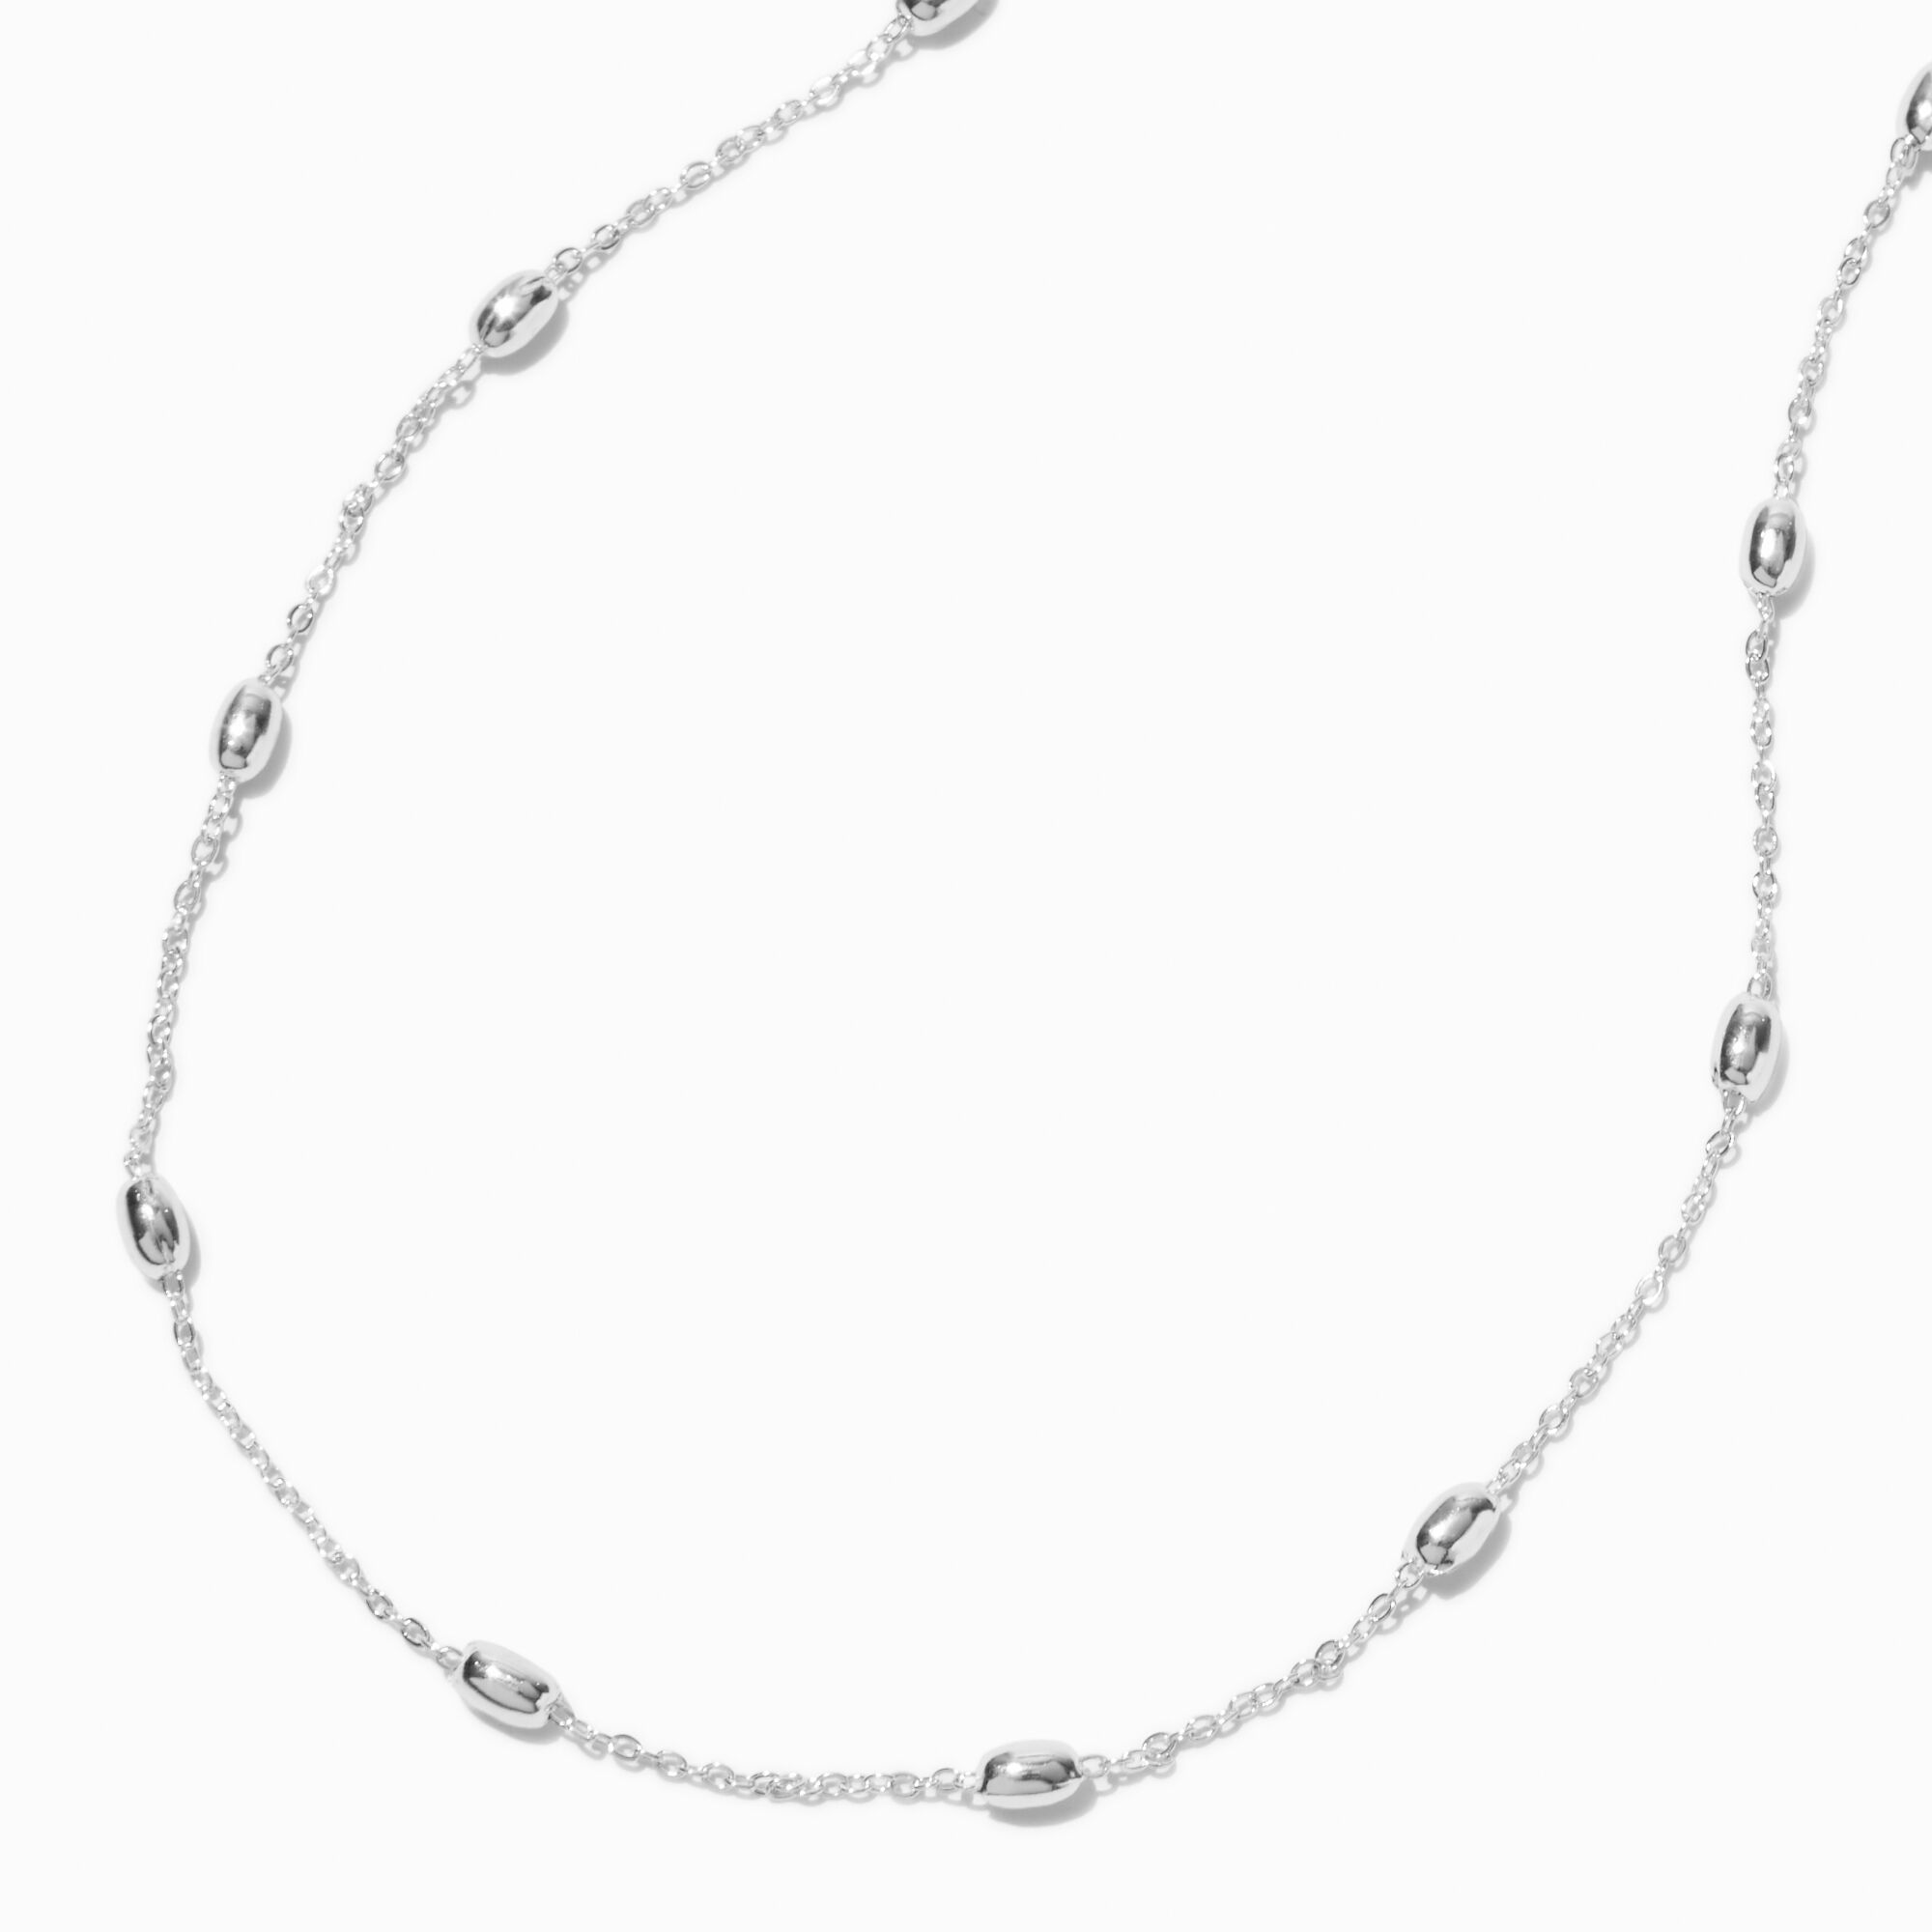 View Claires Tone Oval Bead Station Necklace Silver information